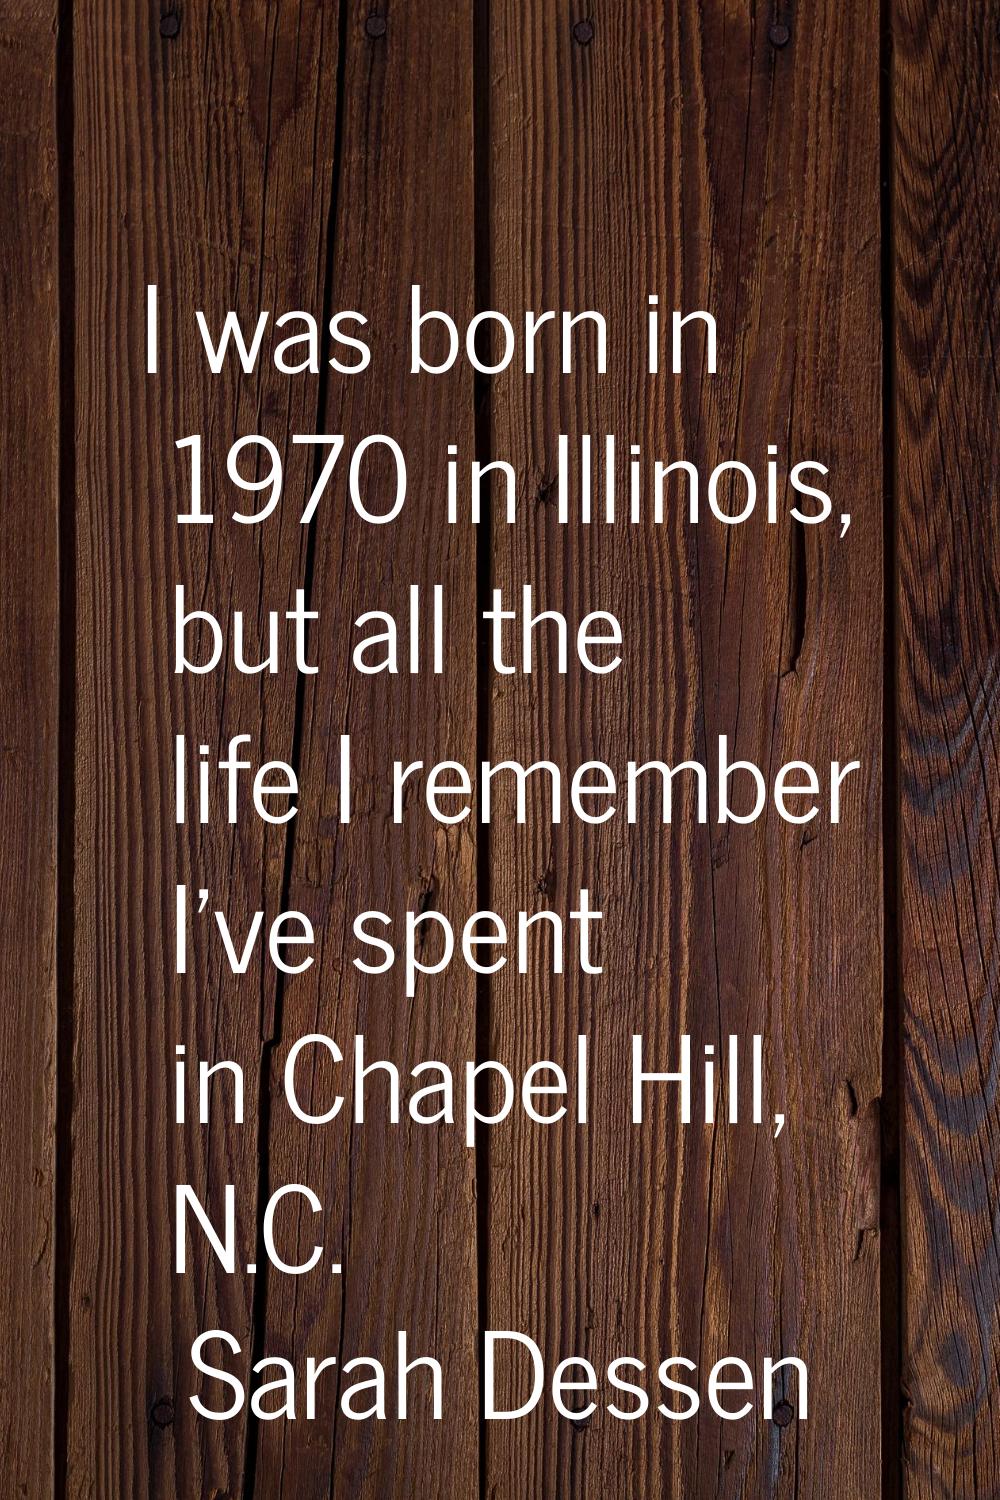 I was born in 1970 in Illinois, but all the life I remember I've spent in Chapel Hill, N.C.